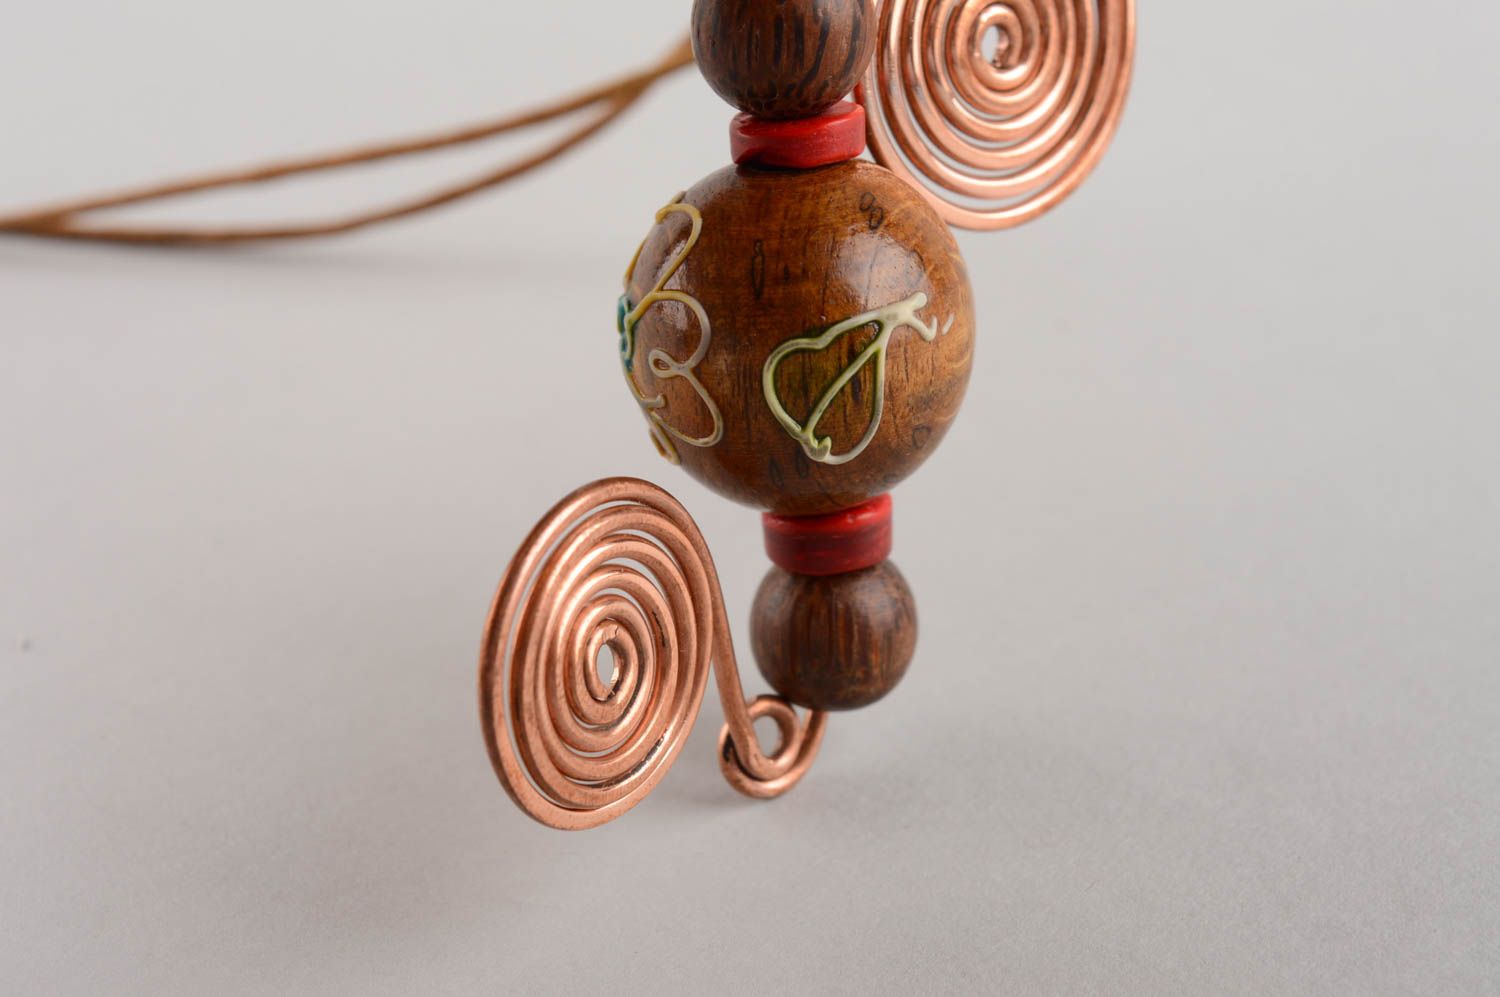 Handmade designer copper wire pendant with wooden beads on cord women accessory photo 5